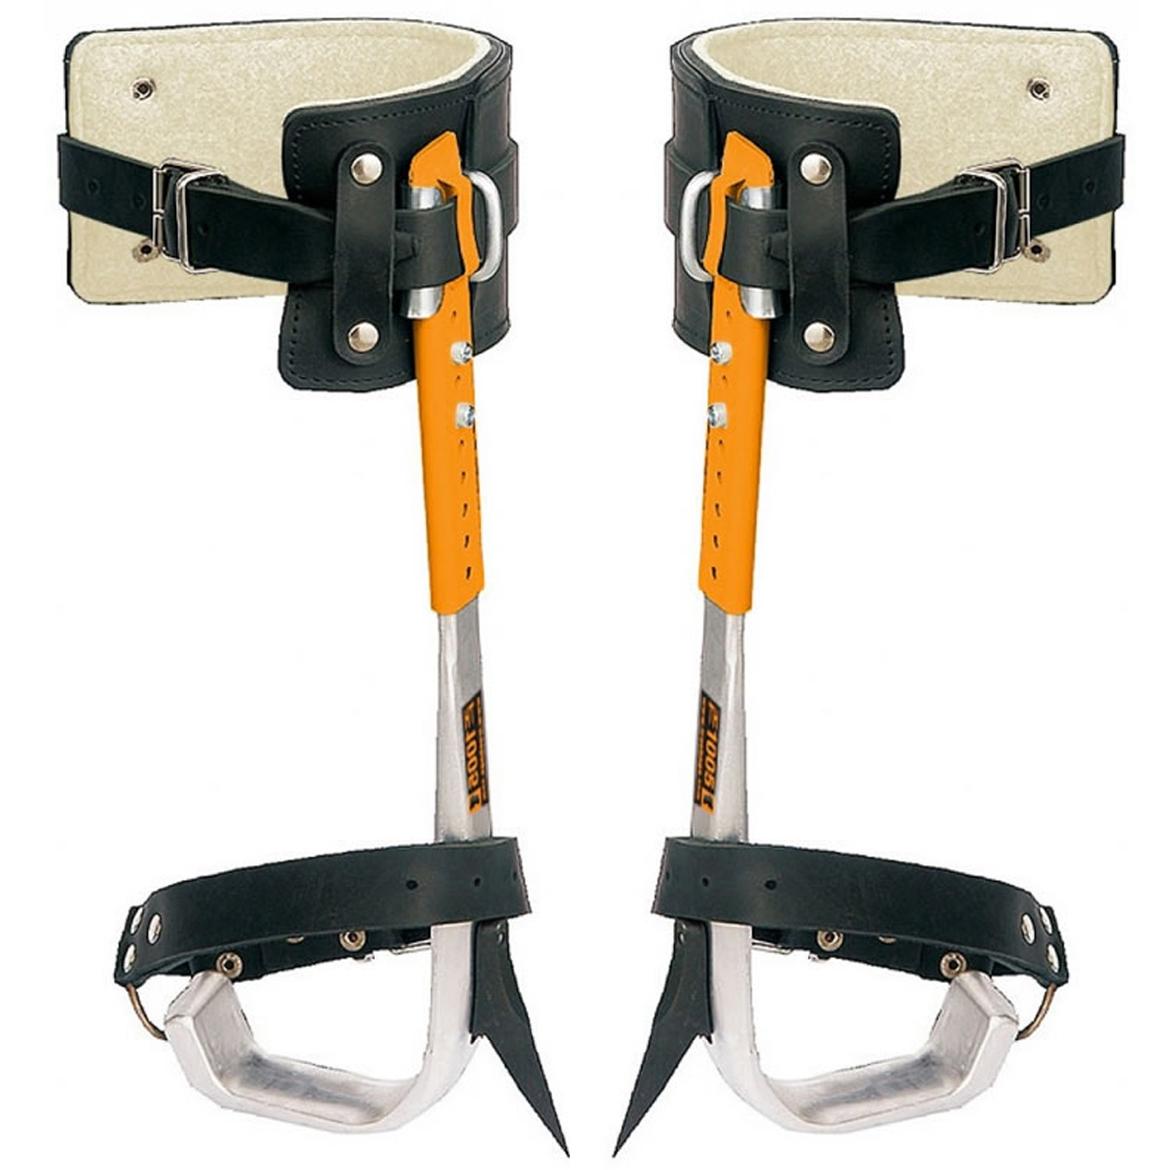 Tree Solutions Aluminium Climbing Spikes Replacement Pair of Bottom Straps 